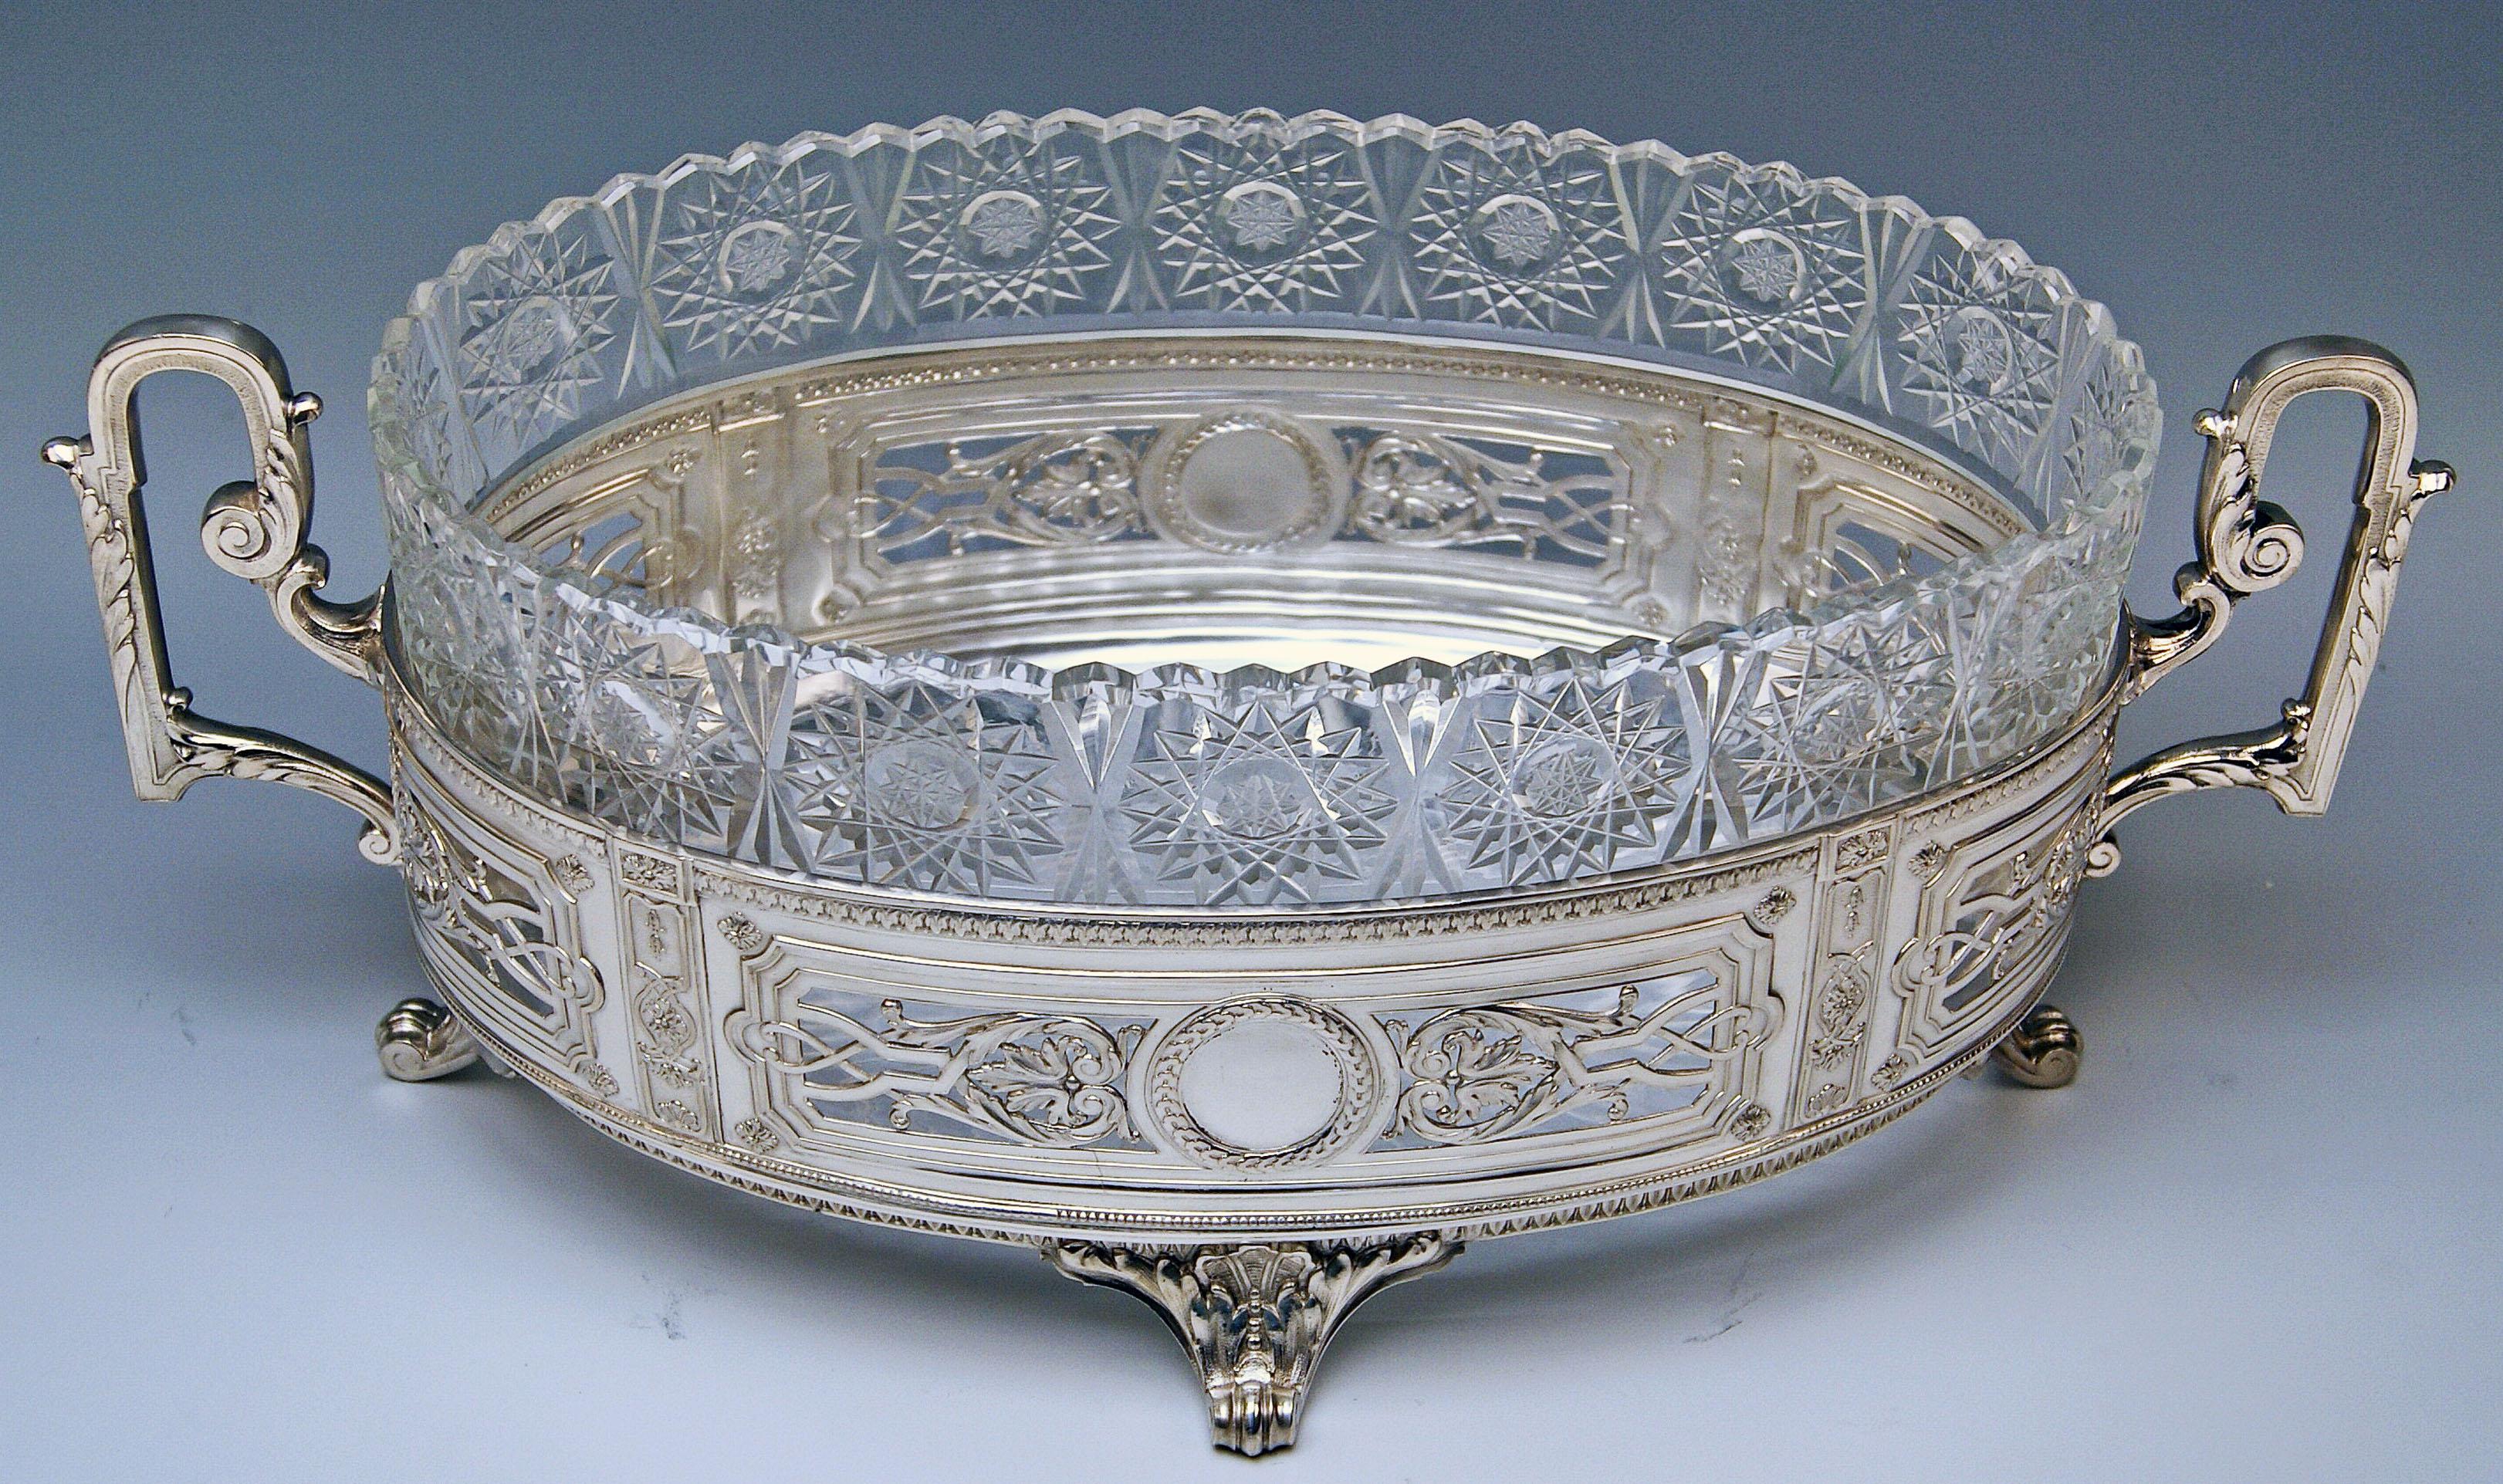 Silver 800 German huge flower bowl / centrepiece with original gorgeous glass liner.

Decorative style / transition to Art Nouveau / made circa 1900

Hallmarked:
-- SILVER 800
-- branded by German Crescent with Crown (used as from the year